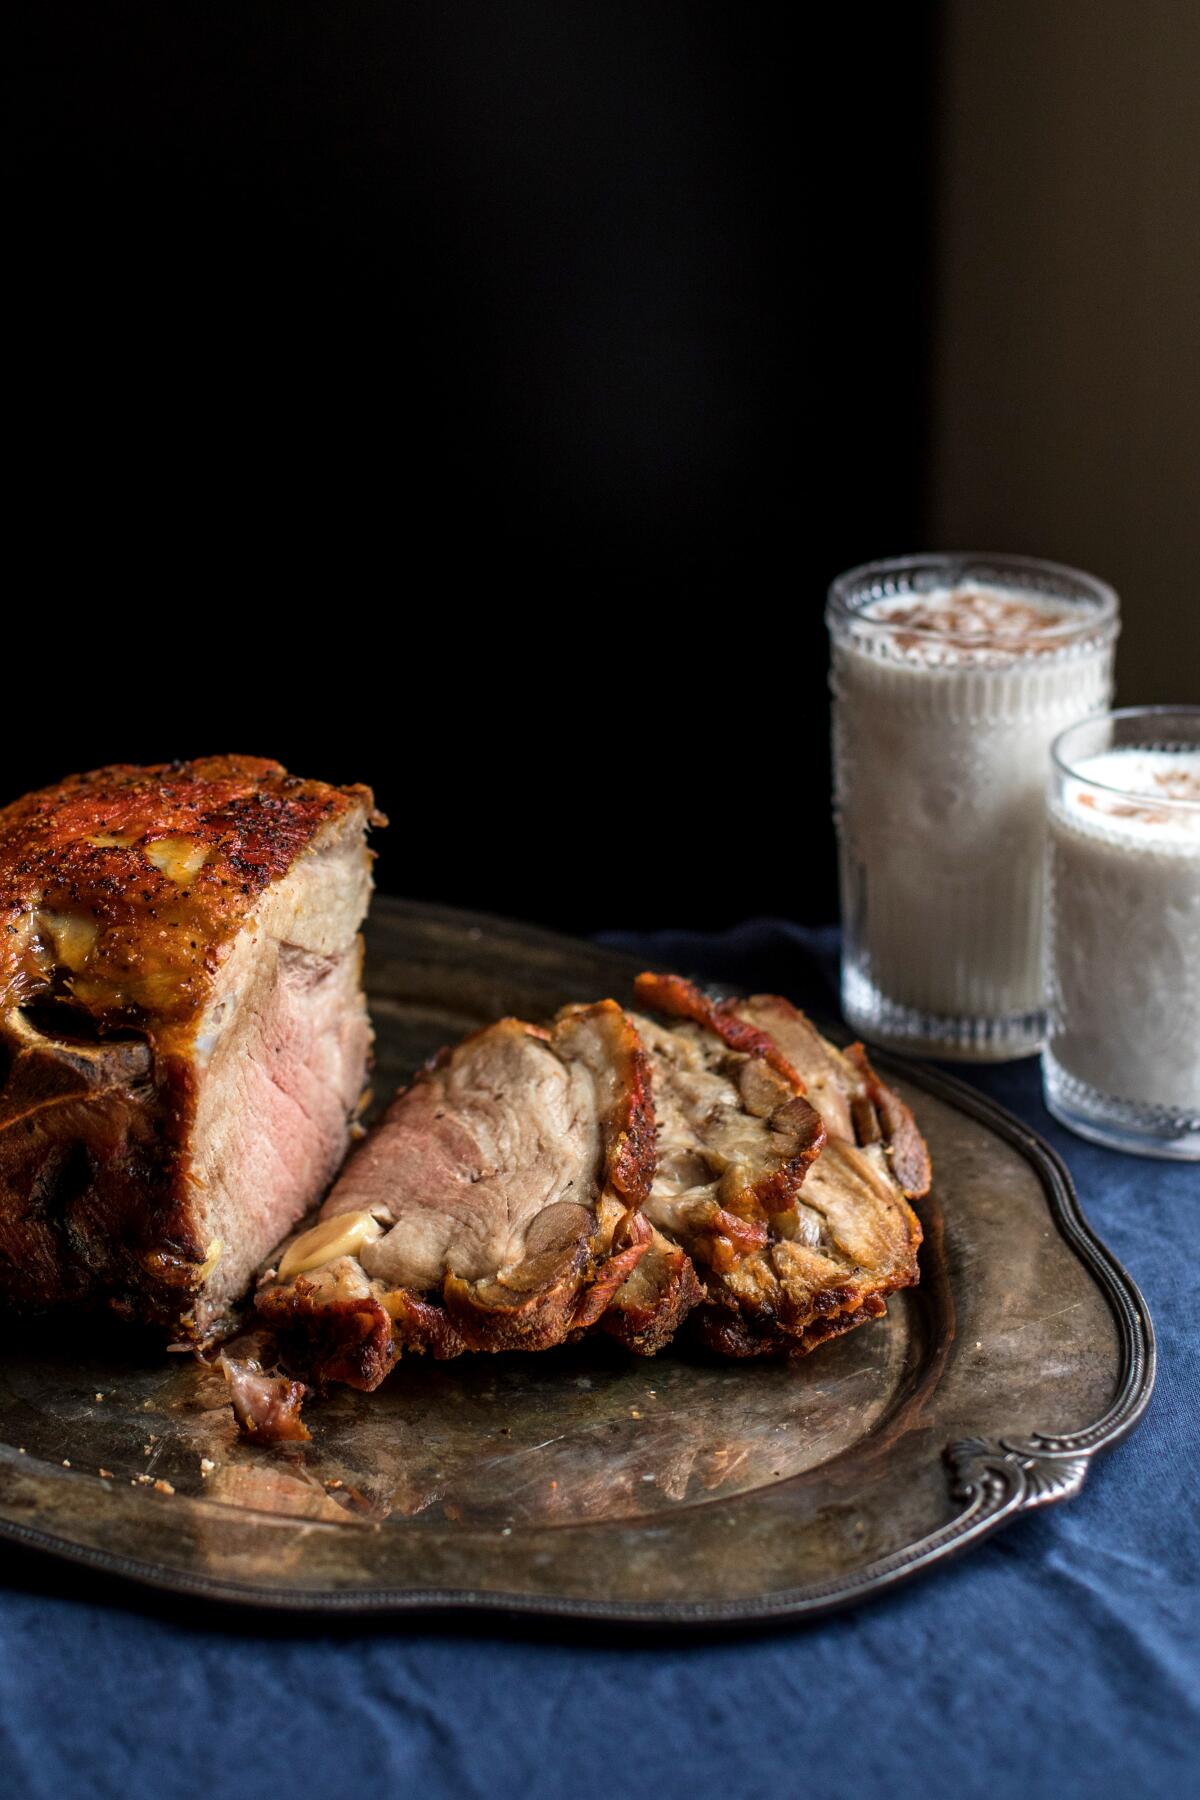 Pernil served with a side of coquito, a Puerto Rican version of eggnog made with coconut milk, coconut cream and evaporated milk